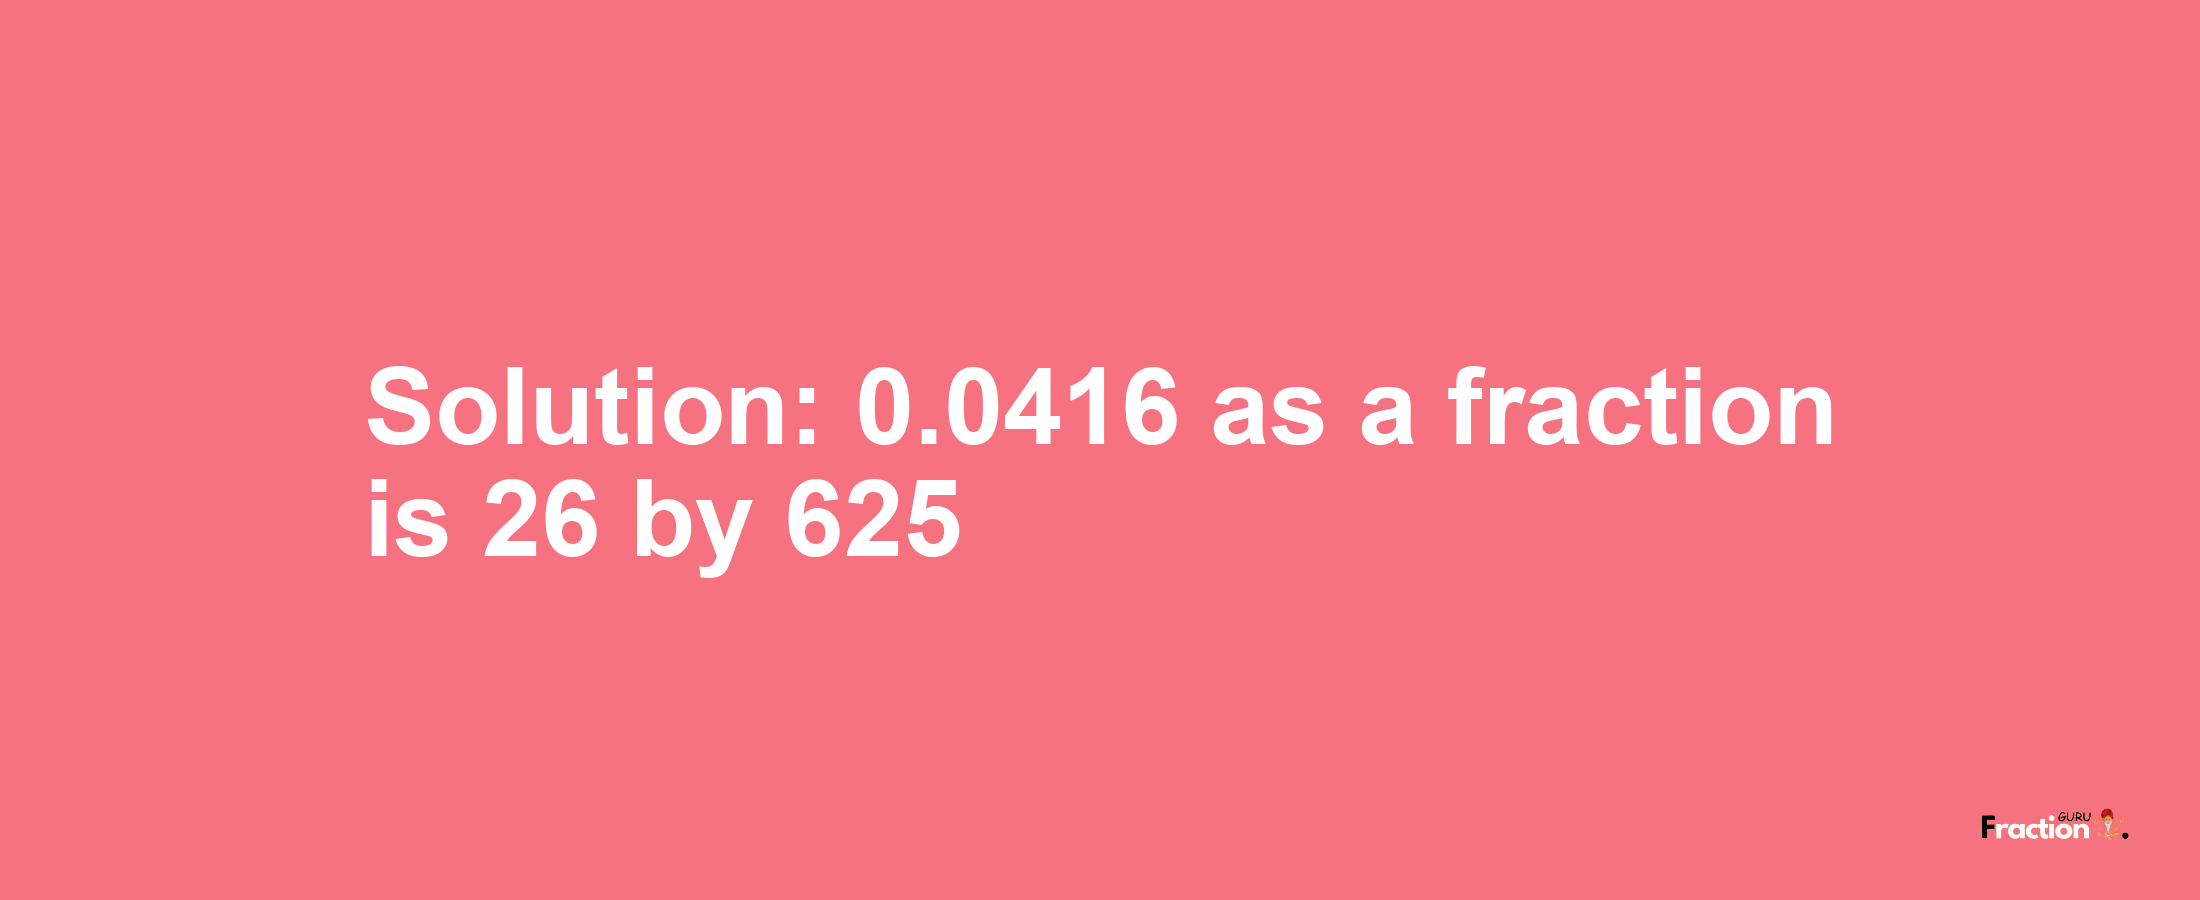 Solution:0.0416 as a fraction is 26/625